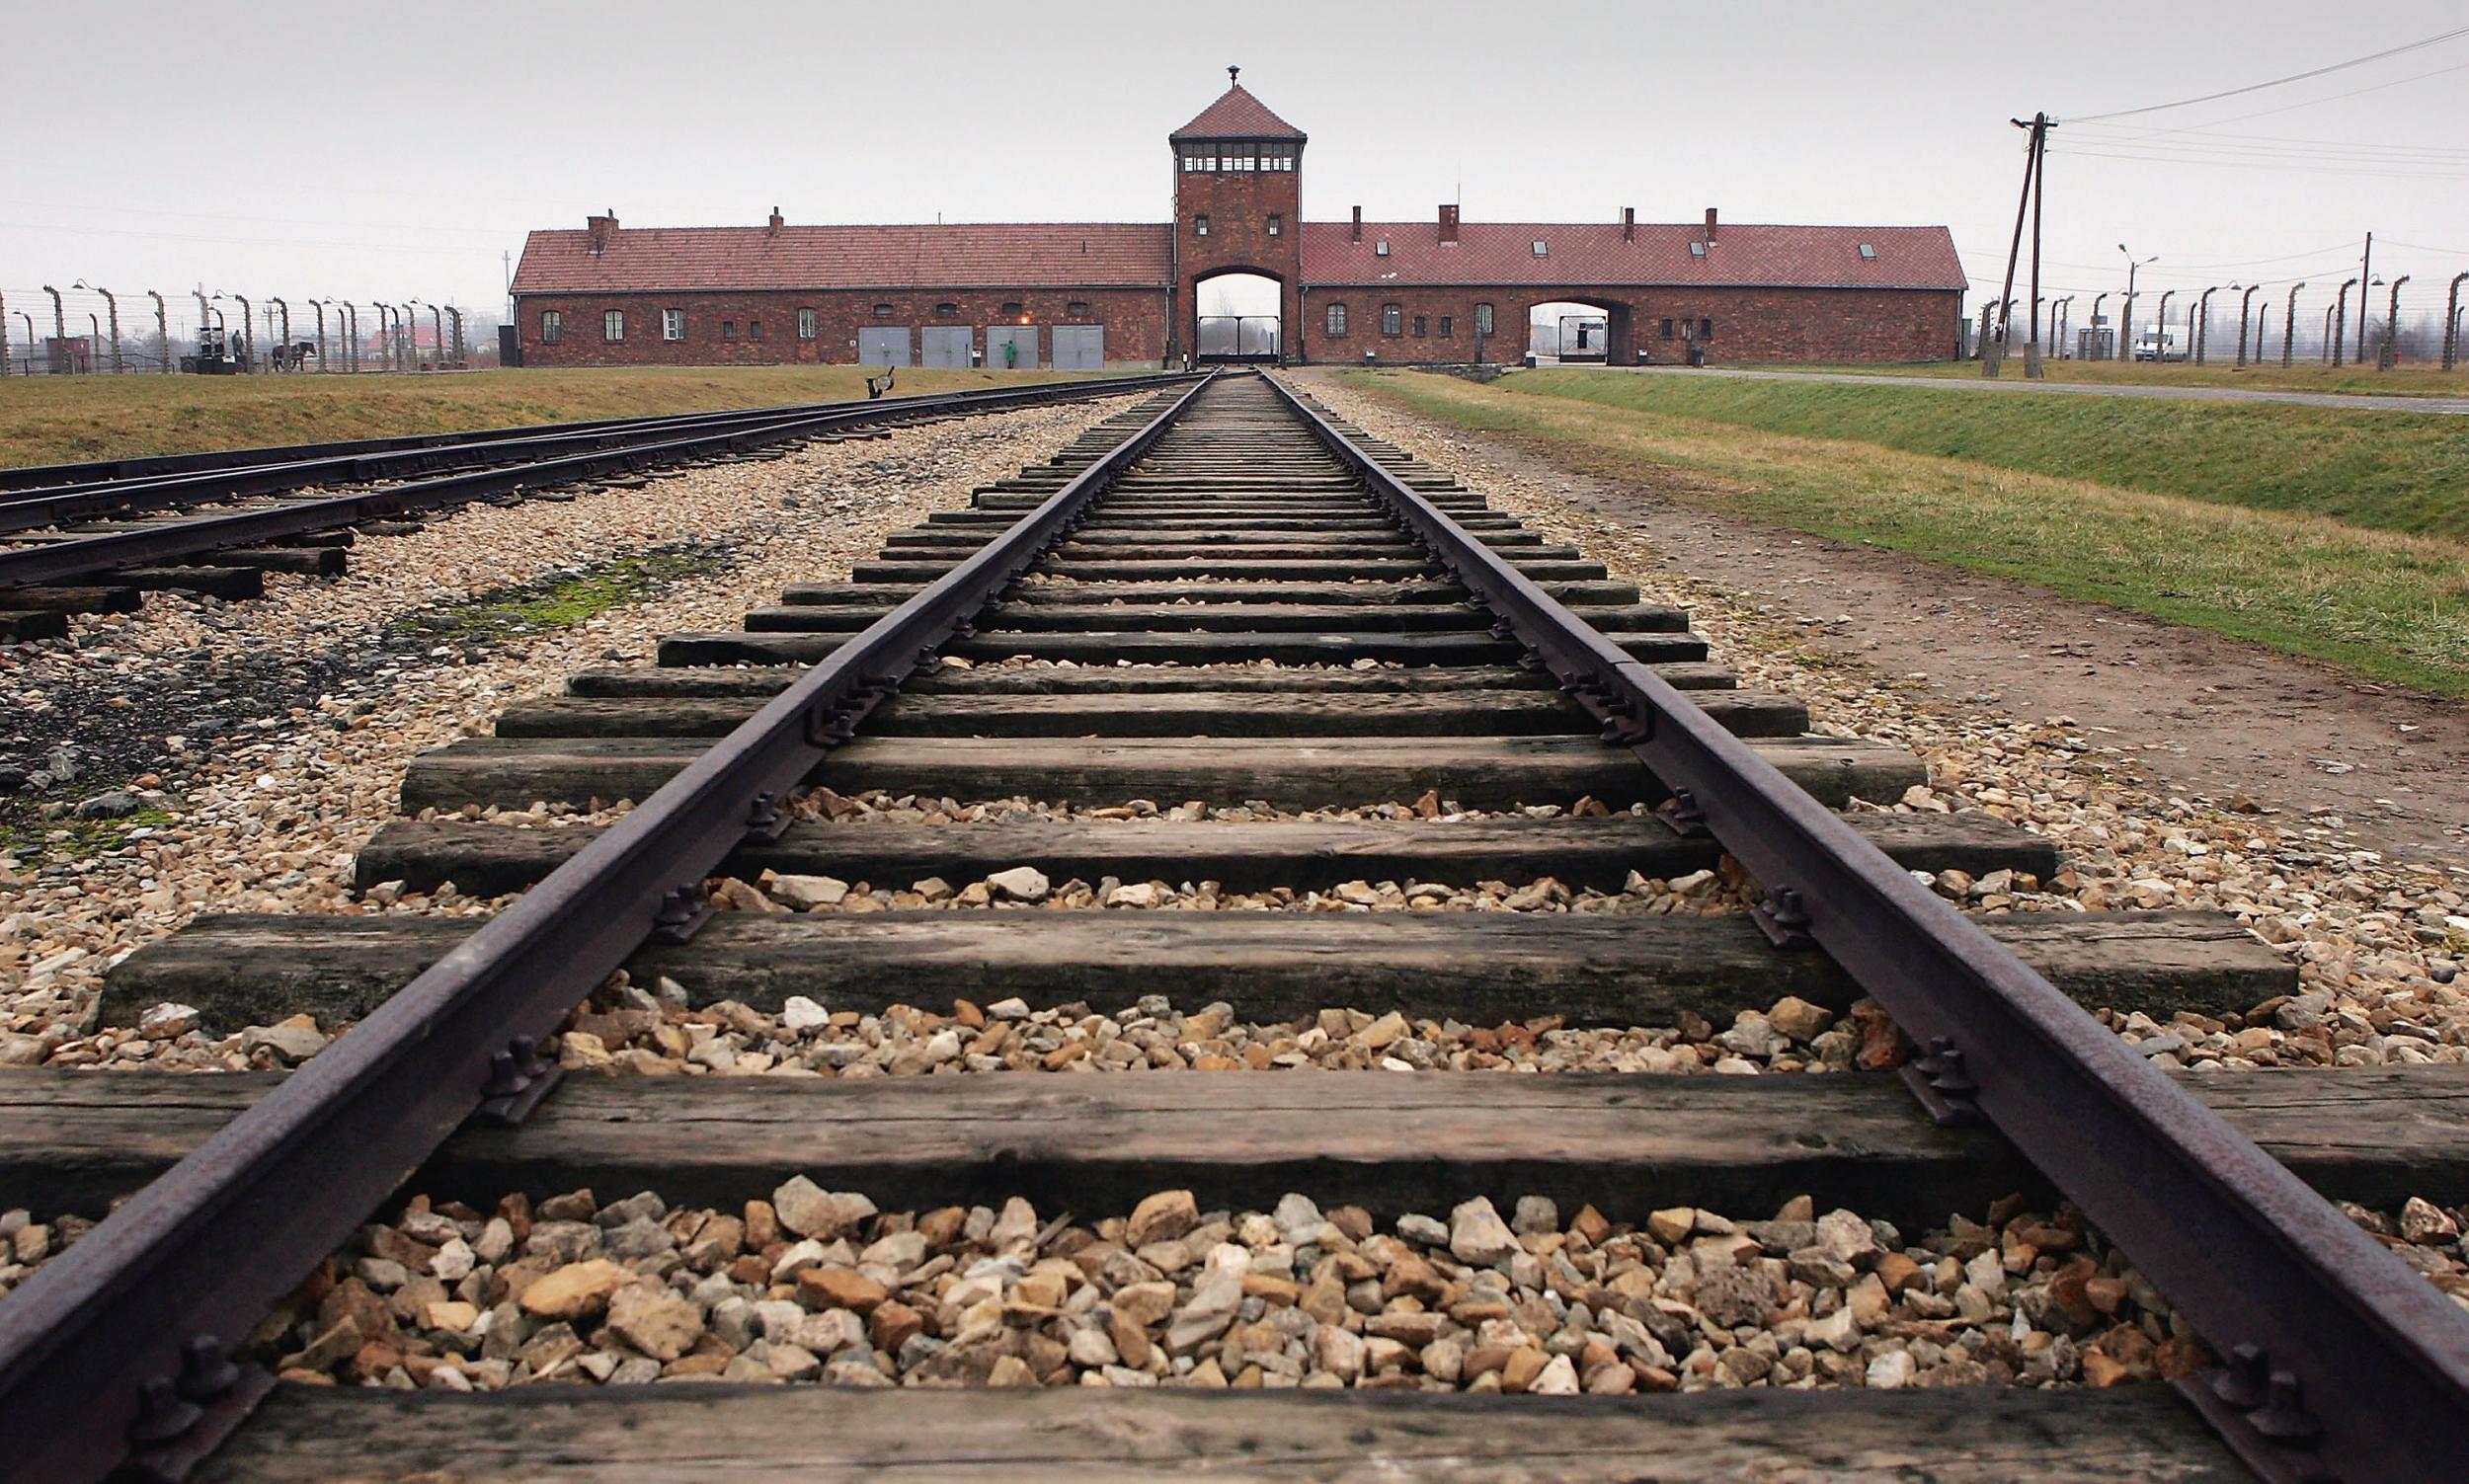 The Holocaust is a black stain on humanity's consciousness